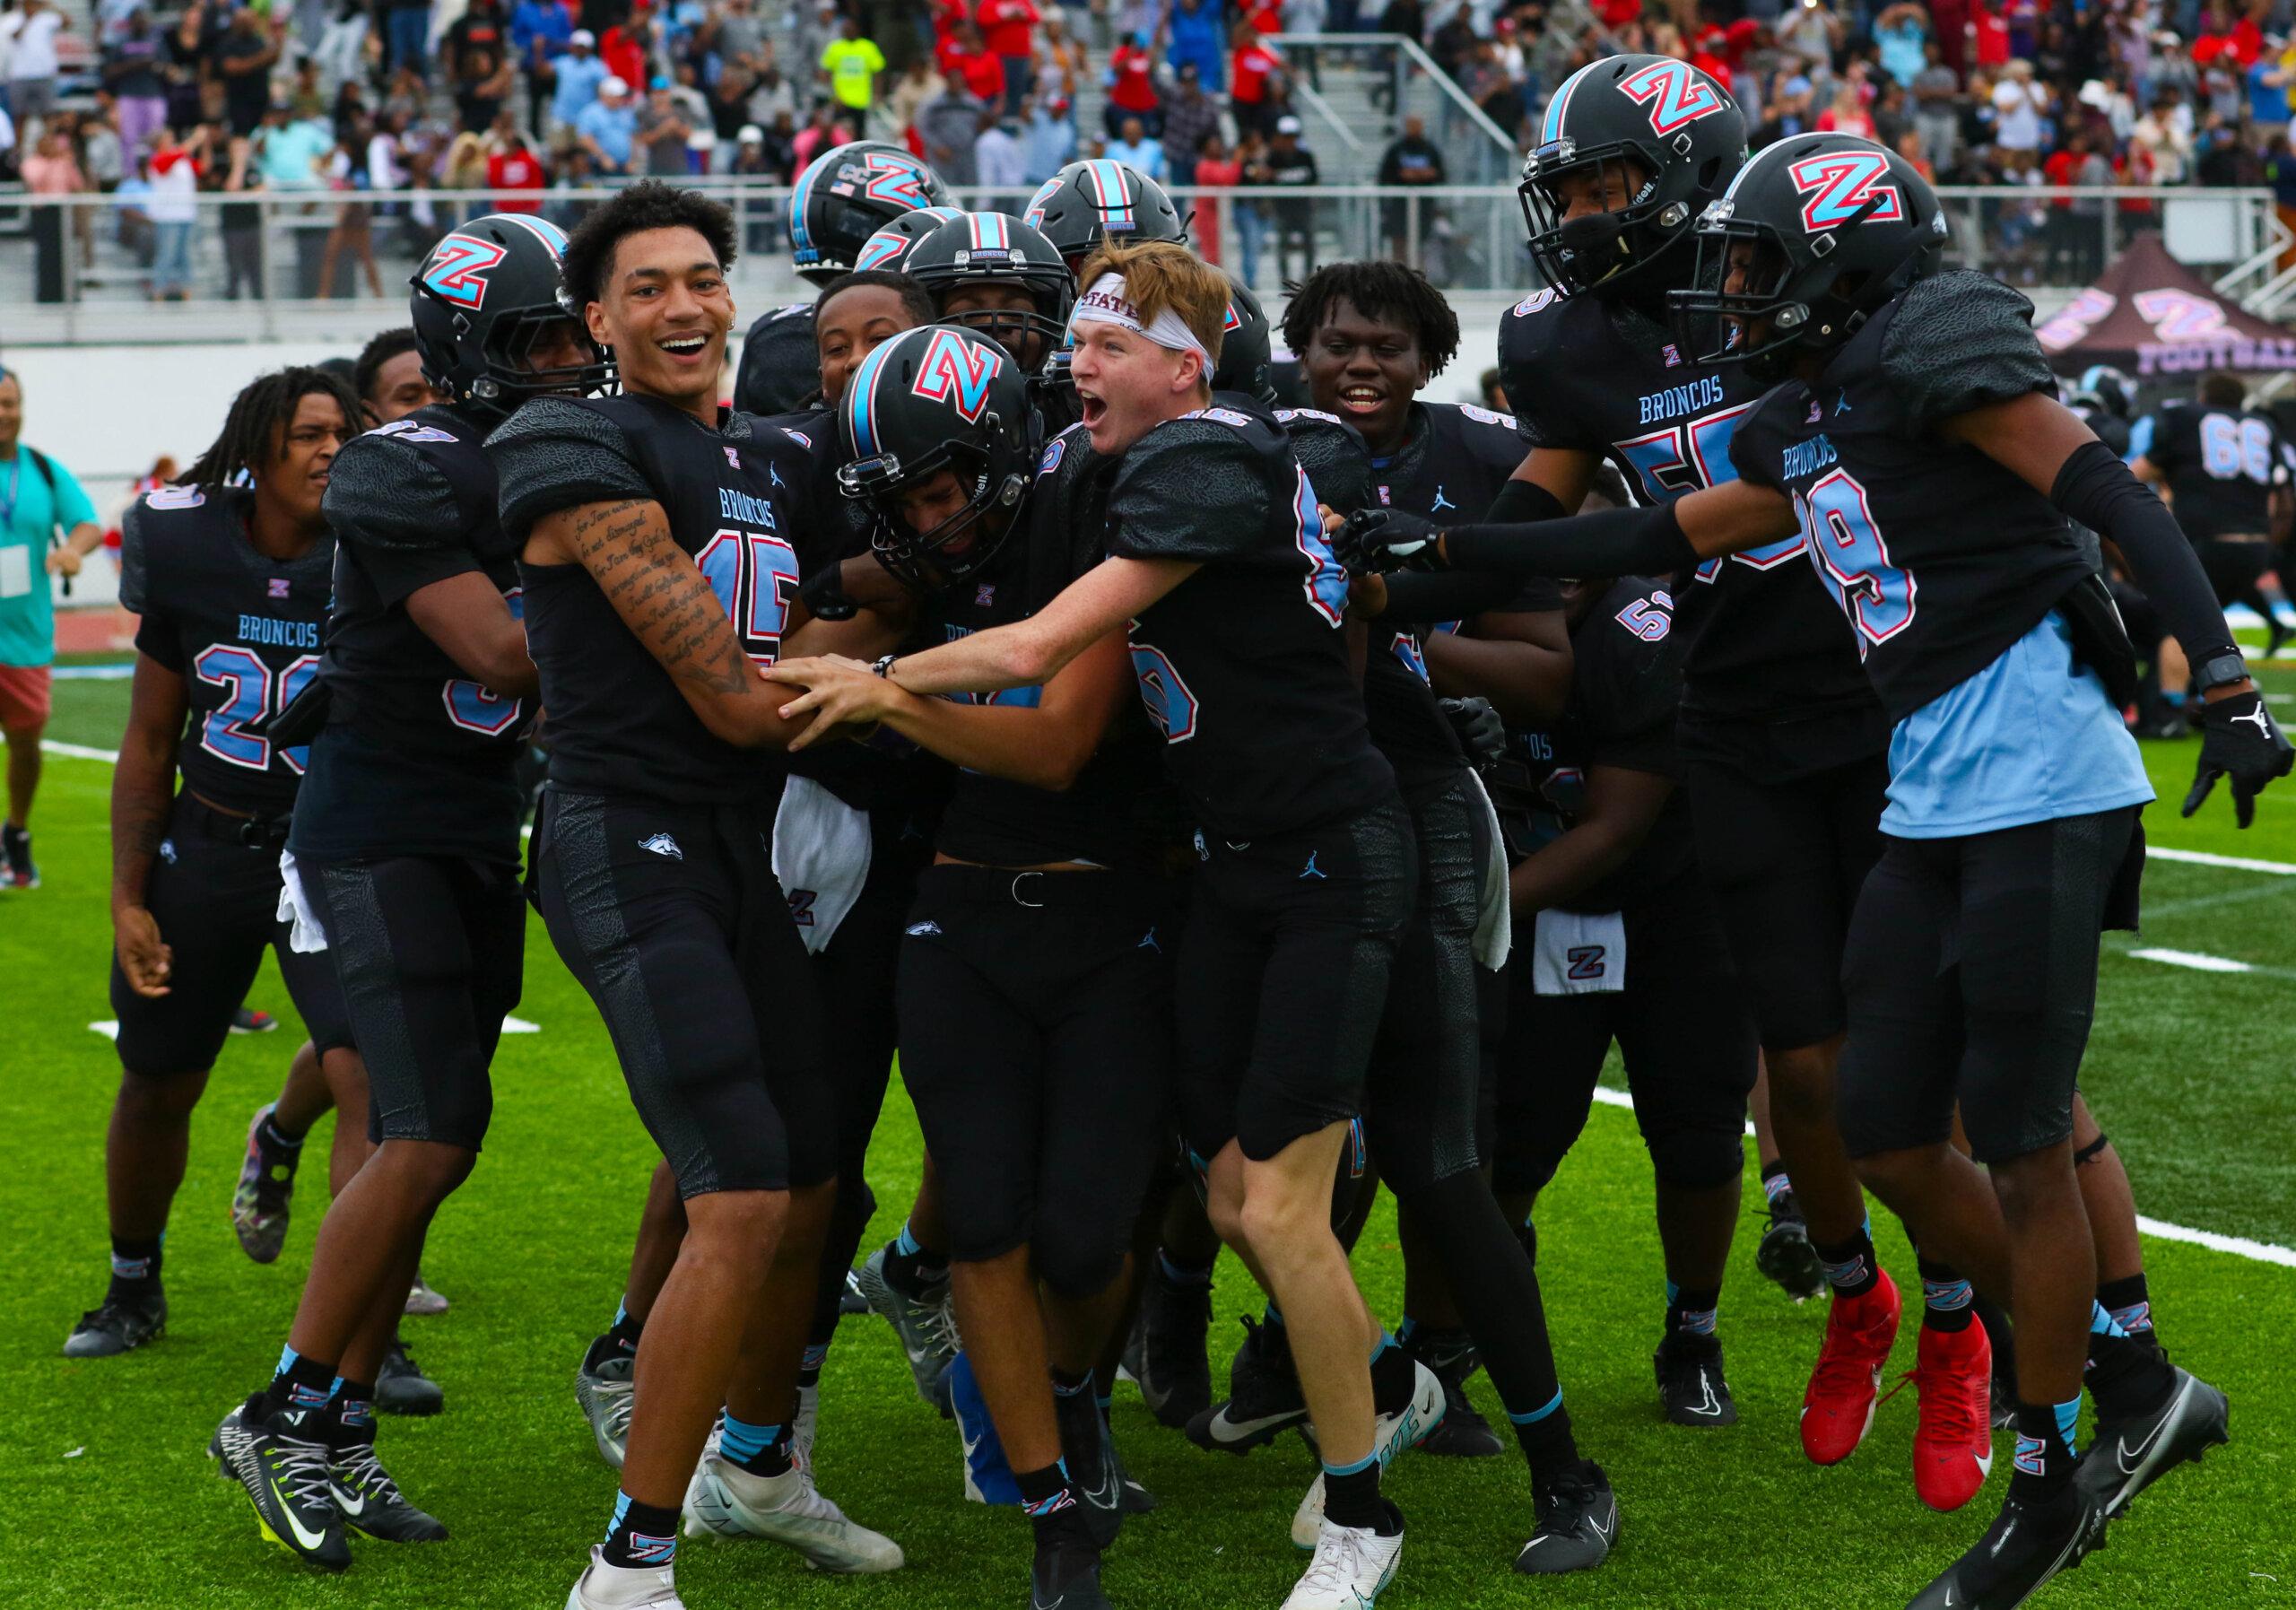 Make Your Chances Count: Zachary advances to the Dome by overcoming 15-point deficit to defeat Dutchtown in overtime